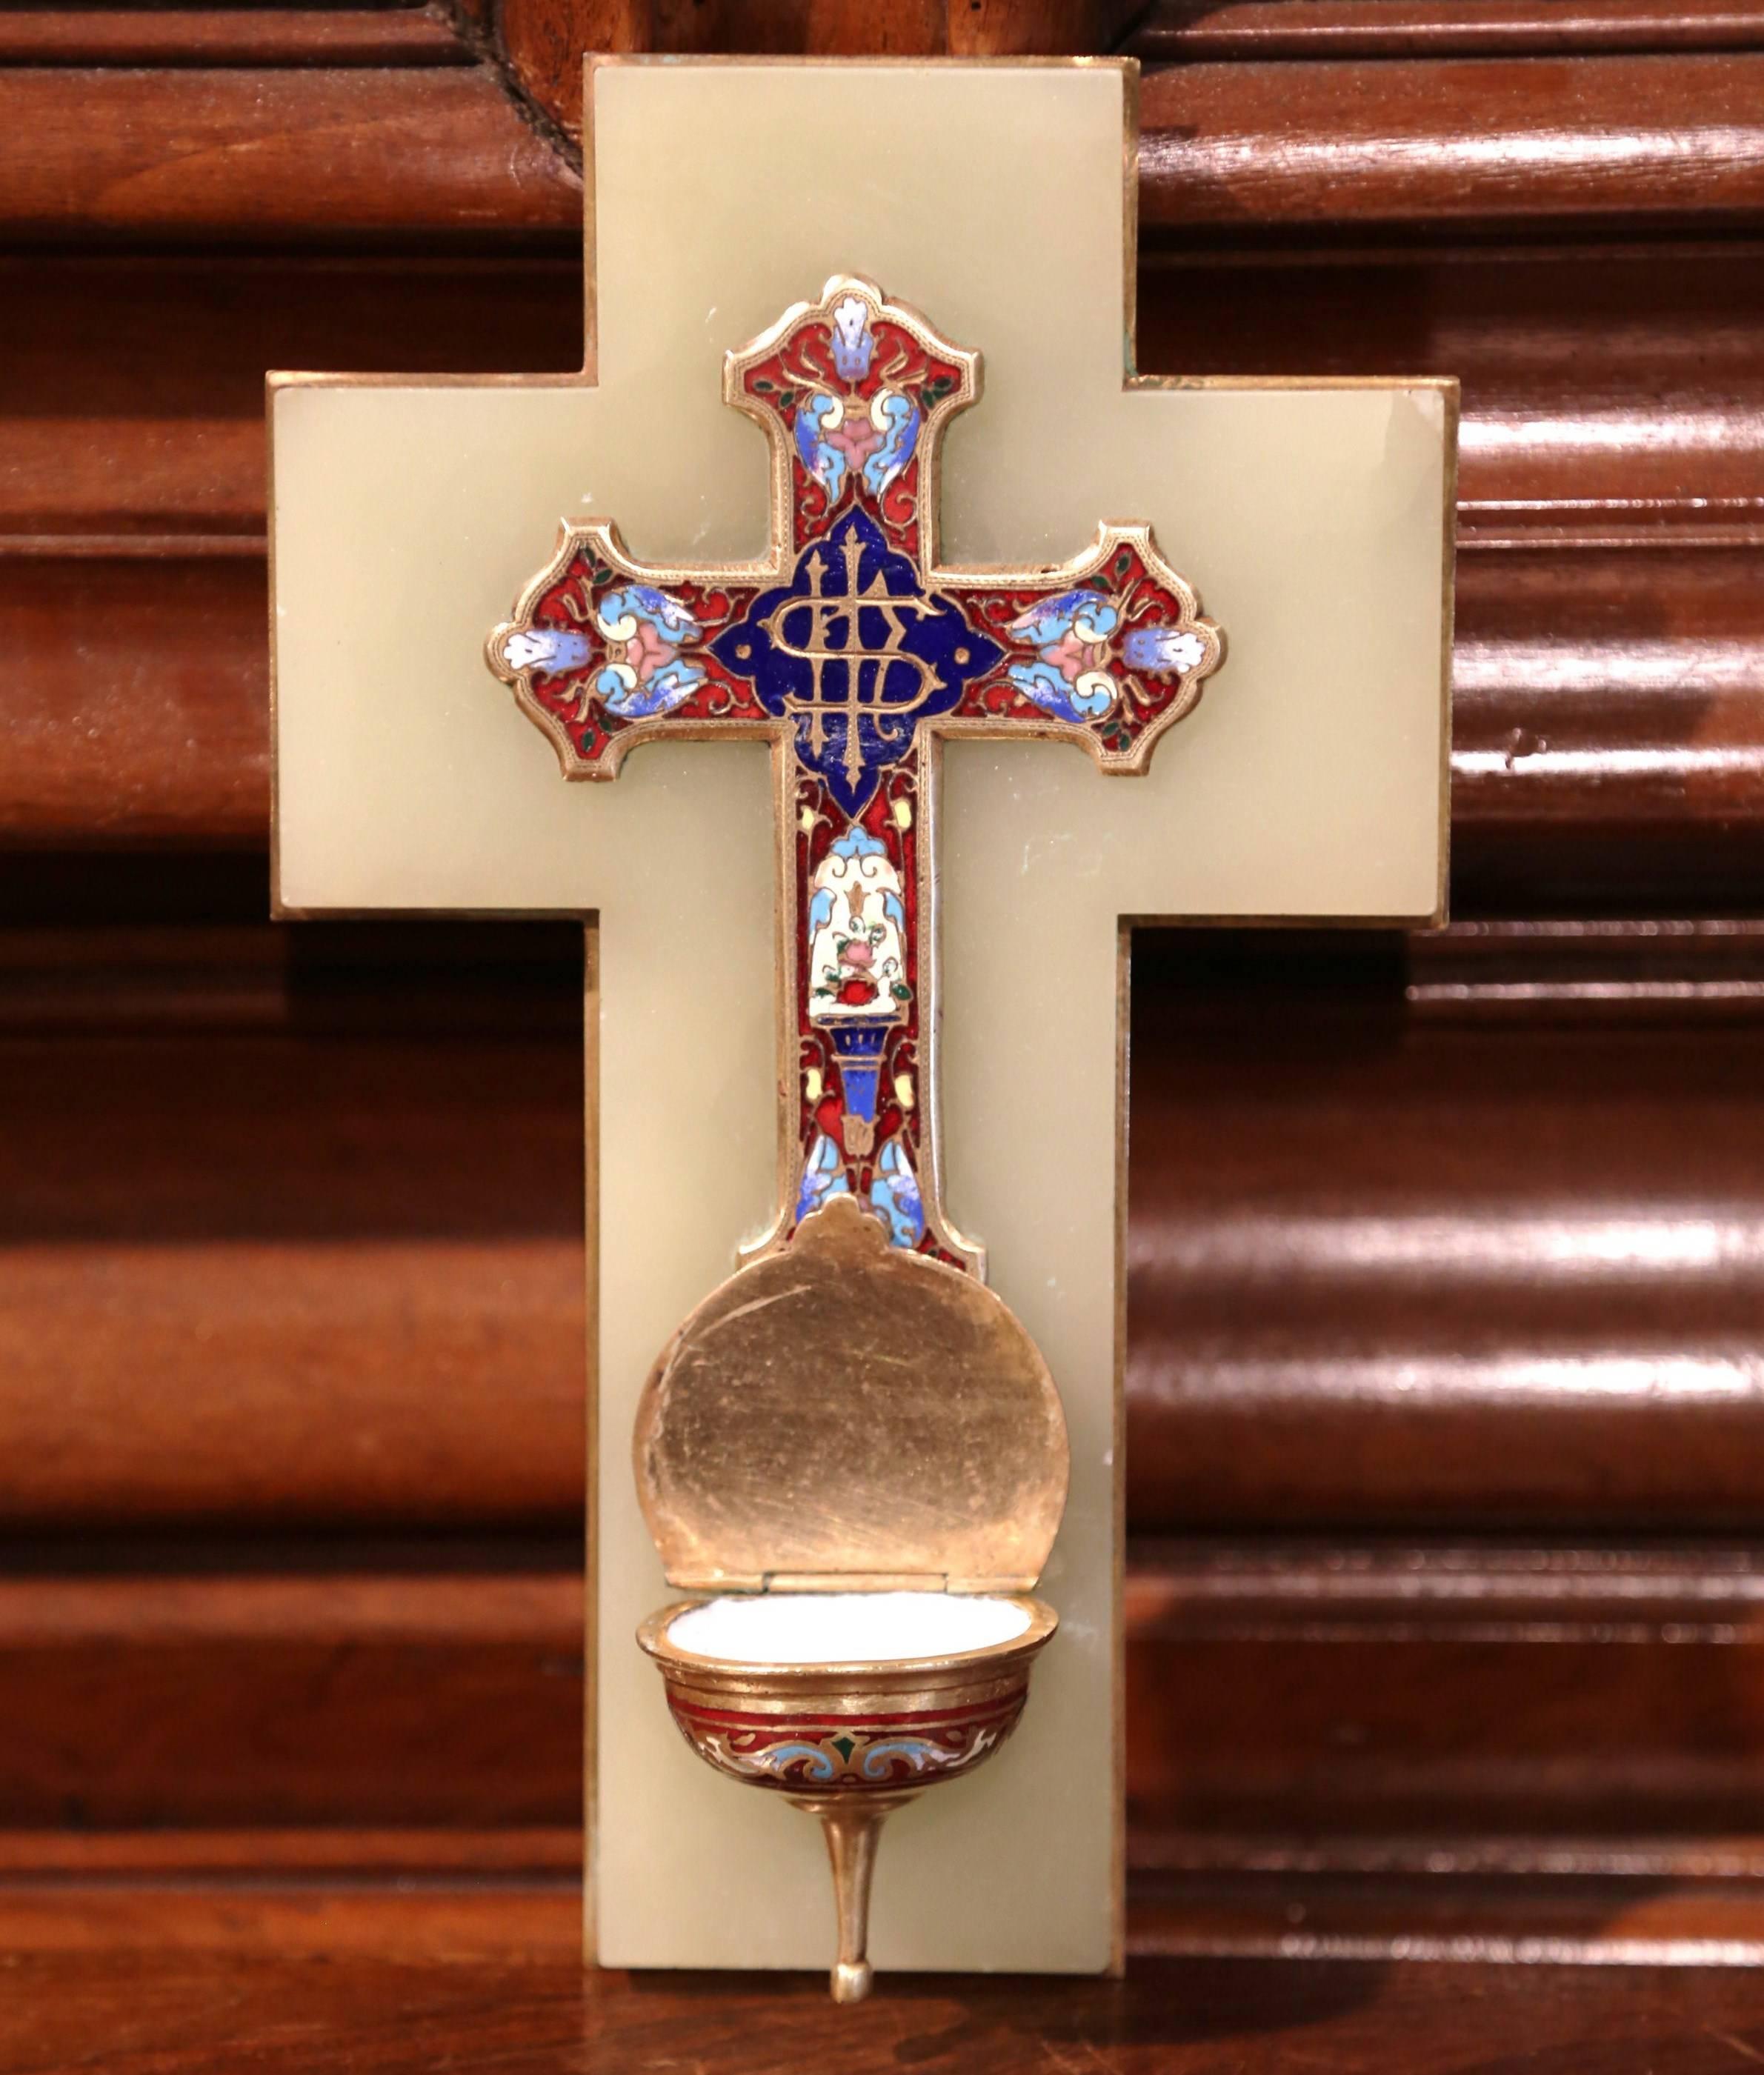 This green marble and cloisonné cross with holy water recipient was created in France, circa 1870. The antique piece has beautiful, intricate cloisonné work with enamel, stone and bronze and a gleaming green marble base. The religious object is in